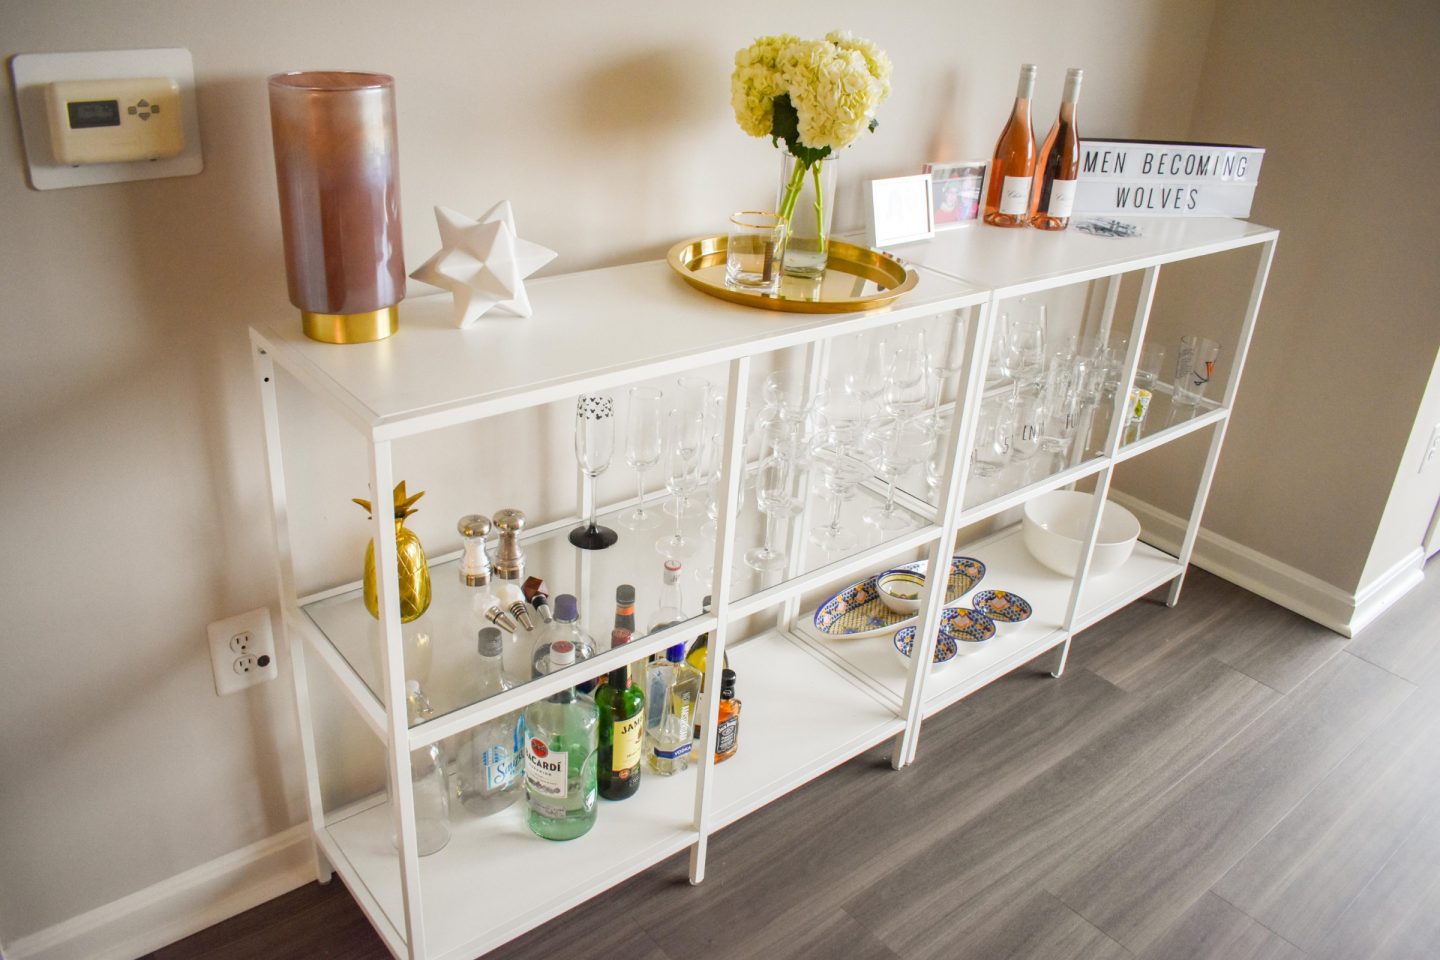 I'm showing off my IKEA bar cart (which are bar shelves, let's be honest) and how I decorated them with all the cute glassware and trinkets!